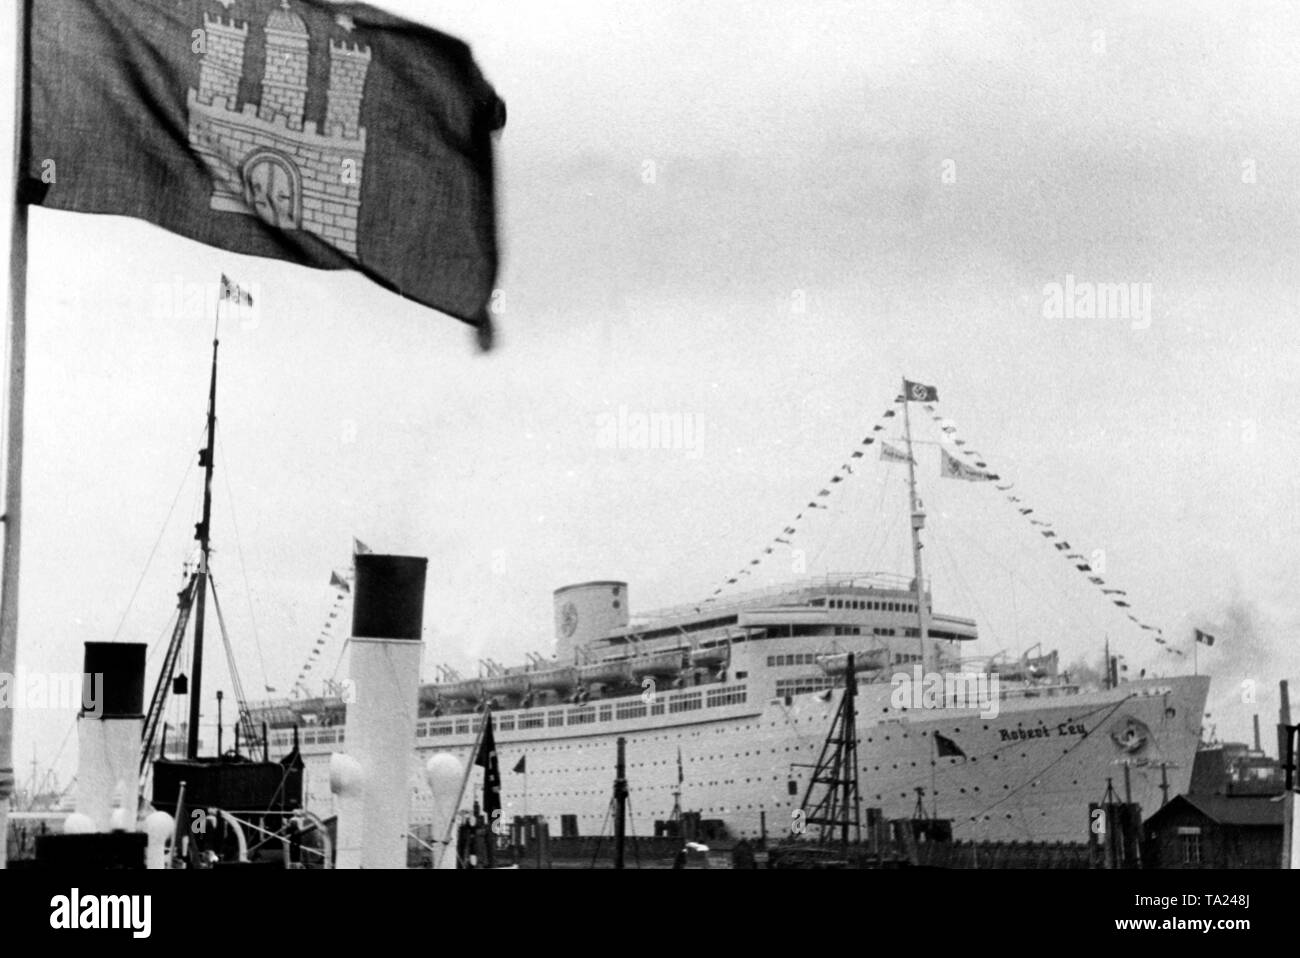 View of the cruise ship 'Robert Ley' of the Nazi organization 'Kraft durch Freude' ('Strength through Joy') in the port of Hamburg. In the foreground a flag with the coat of arms of Hamburg. Stock Photo